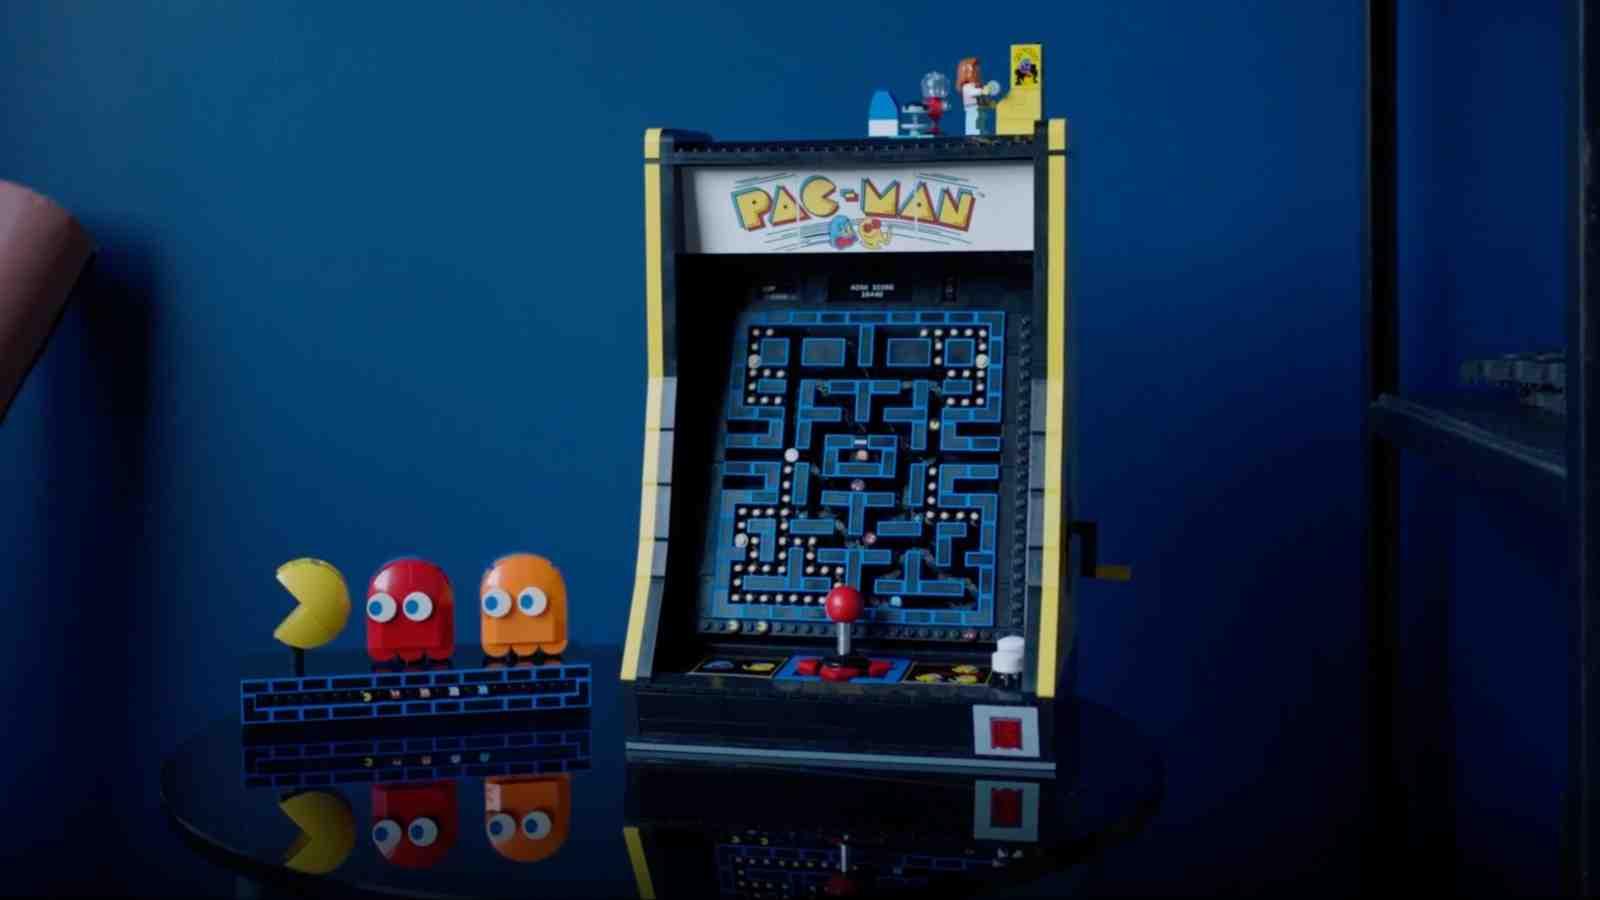 The LEGO Icons PAC-MAN Arcade on display